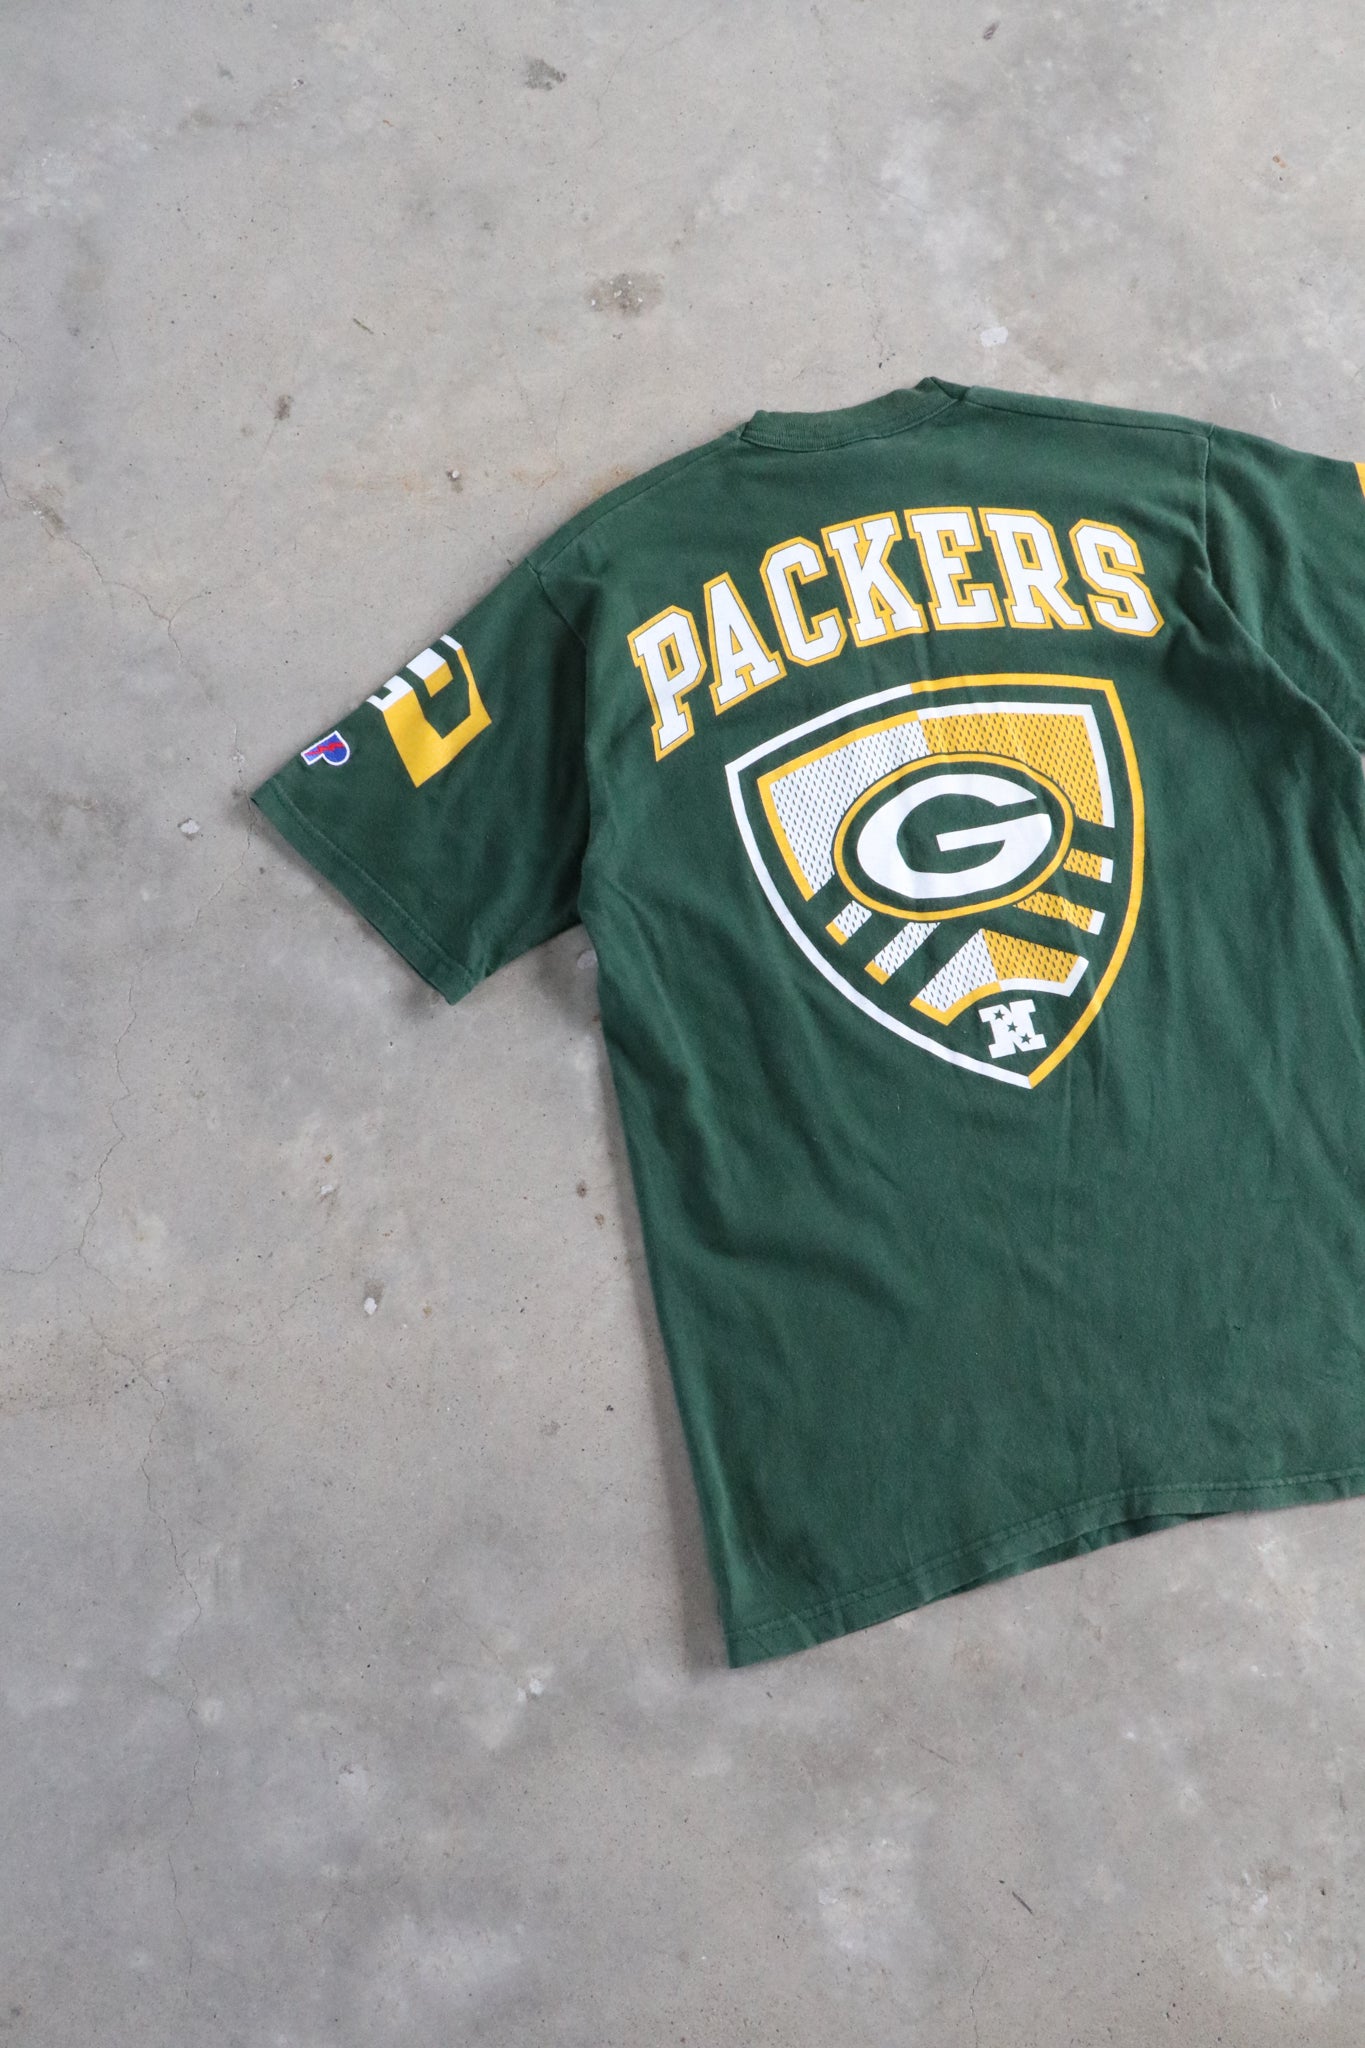 Vintage 1997 NFL Packers Tee Small